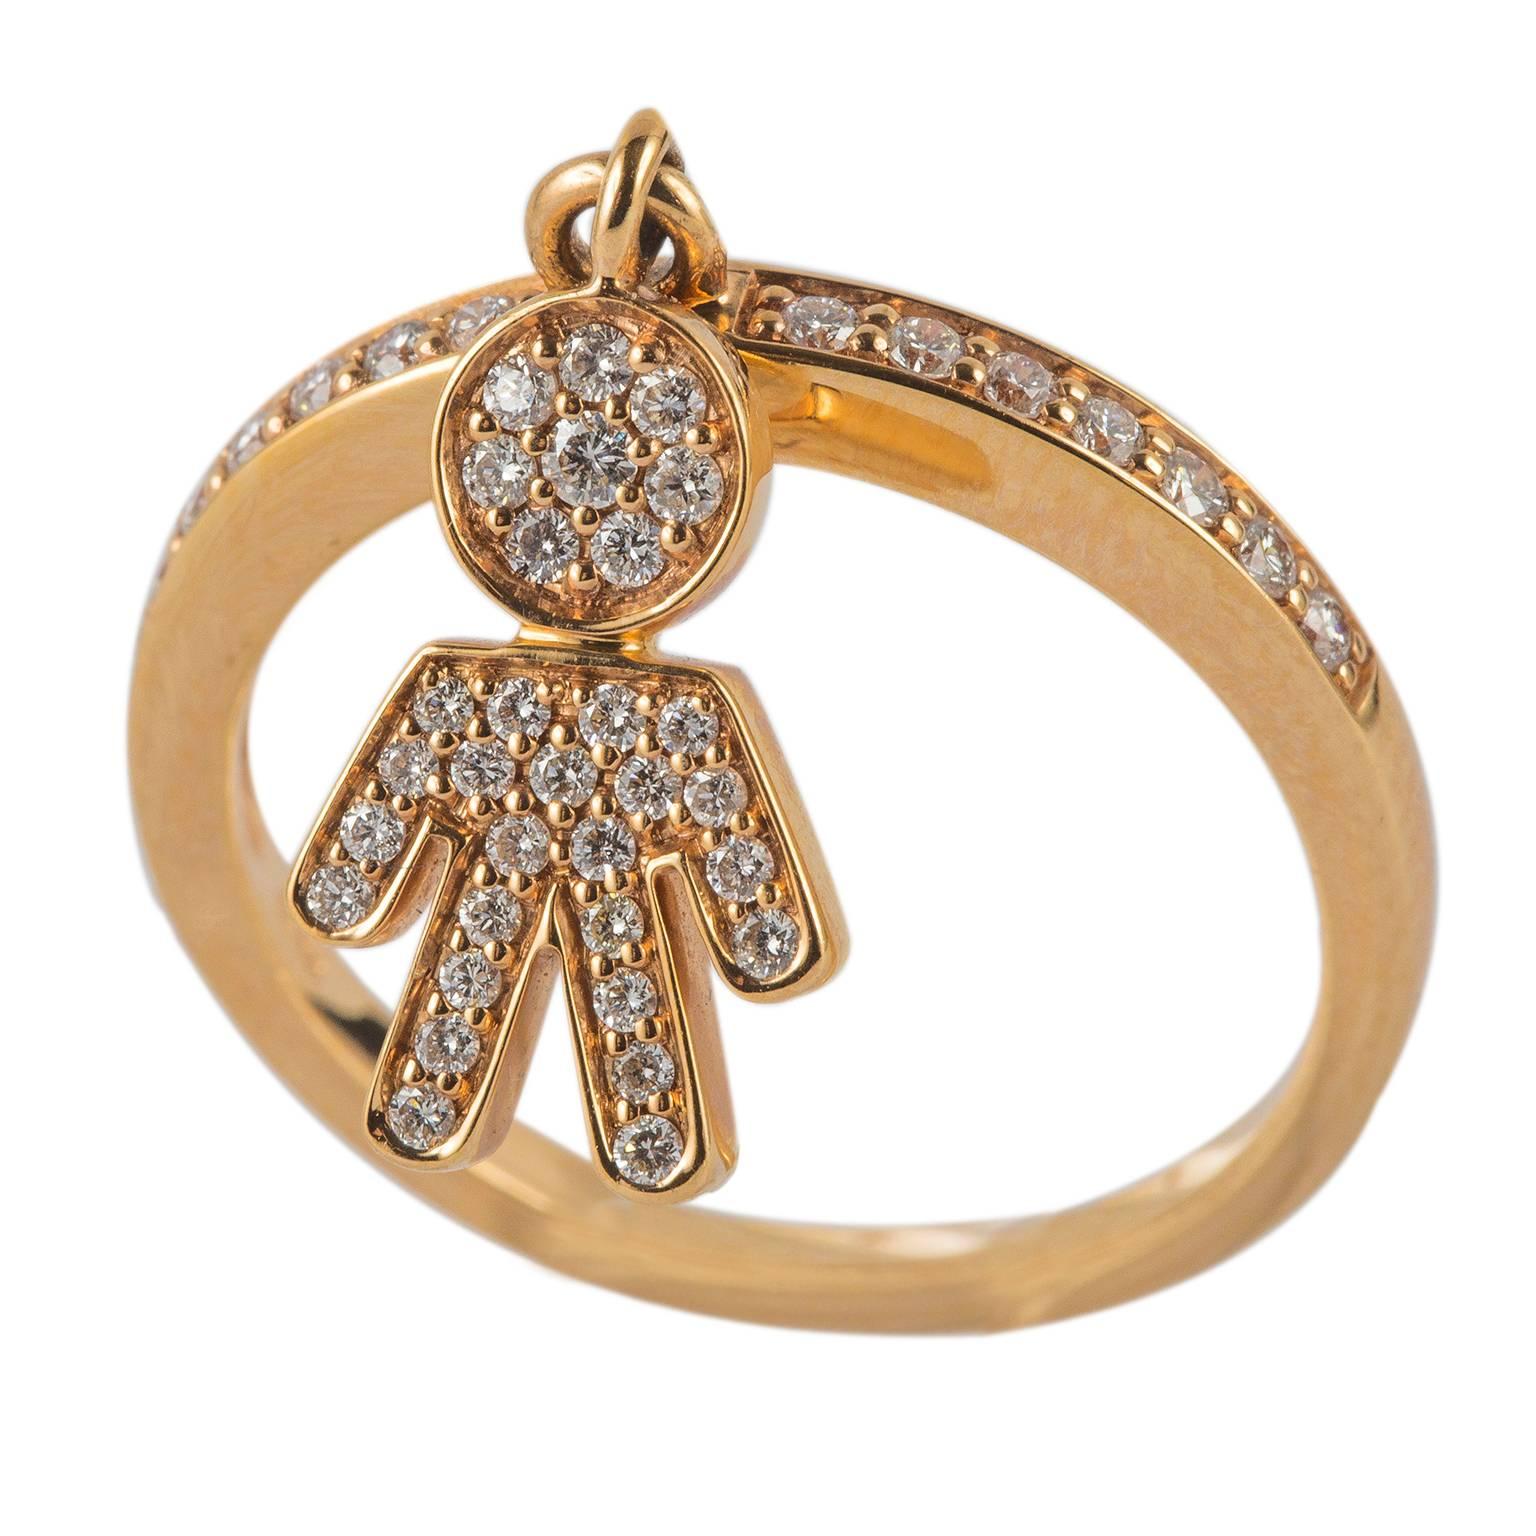 18 Karat yellow gold ring with 0,34 ct. of brilliant cut white diamonds on the top of the ring and forming an adorable baby boy. 
Size 6 ¾ US – 54 EU